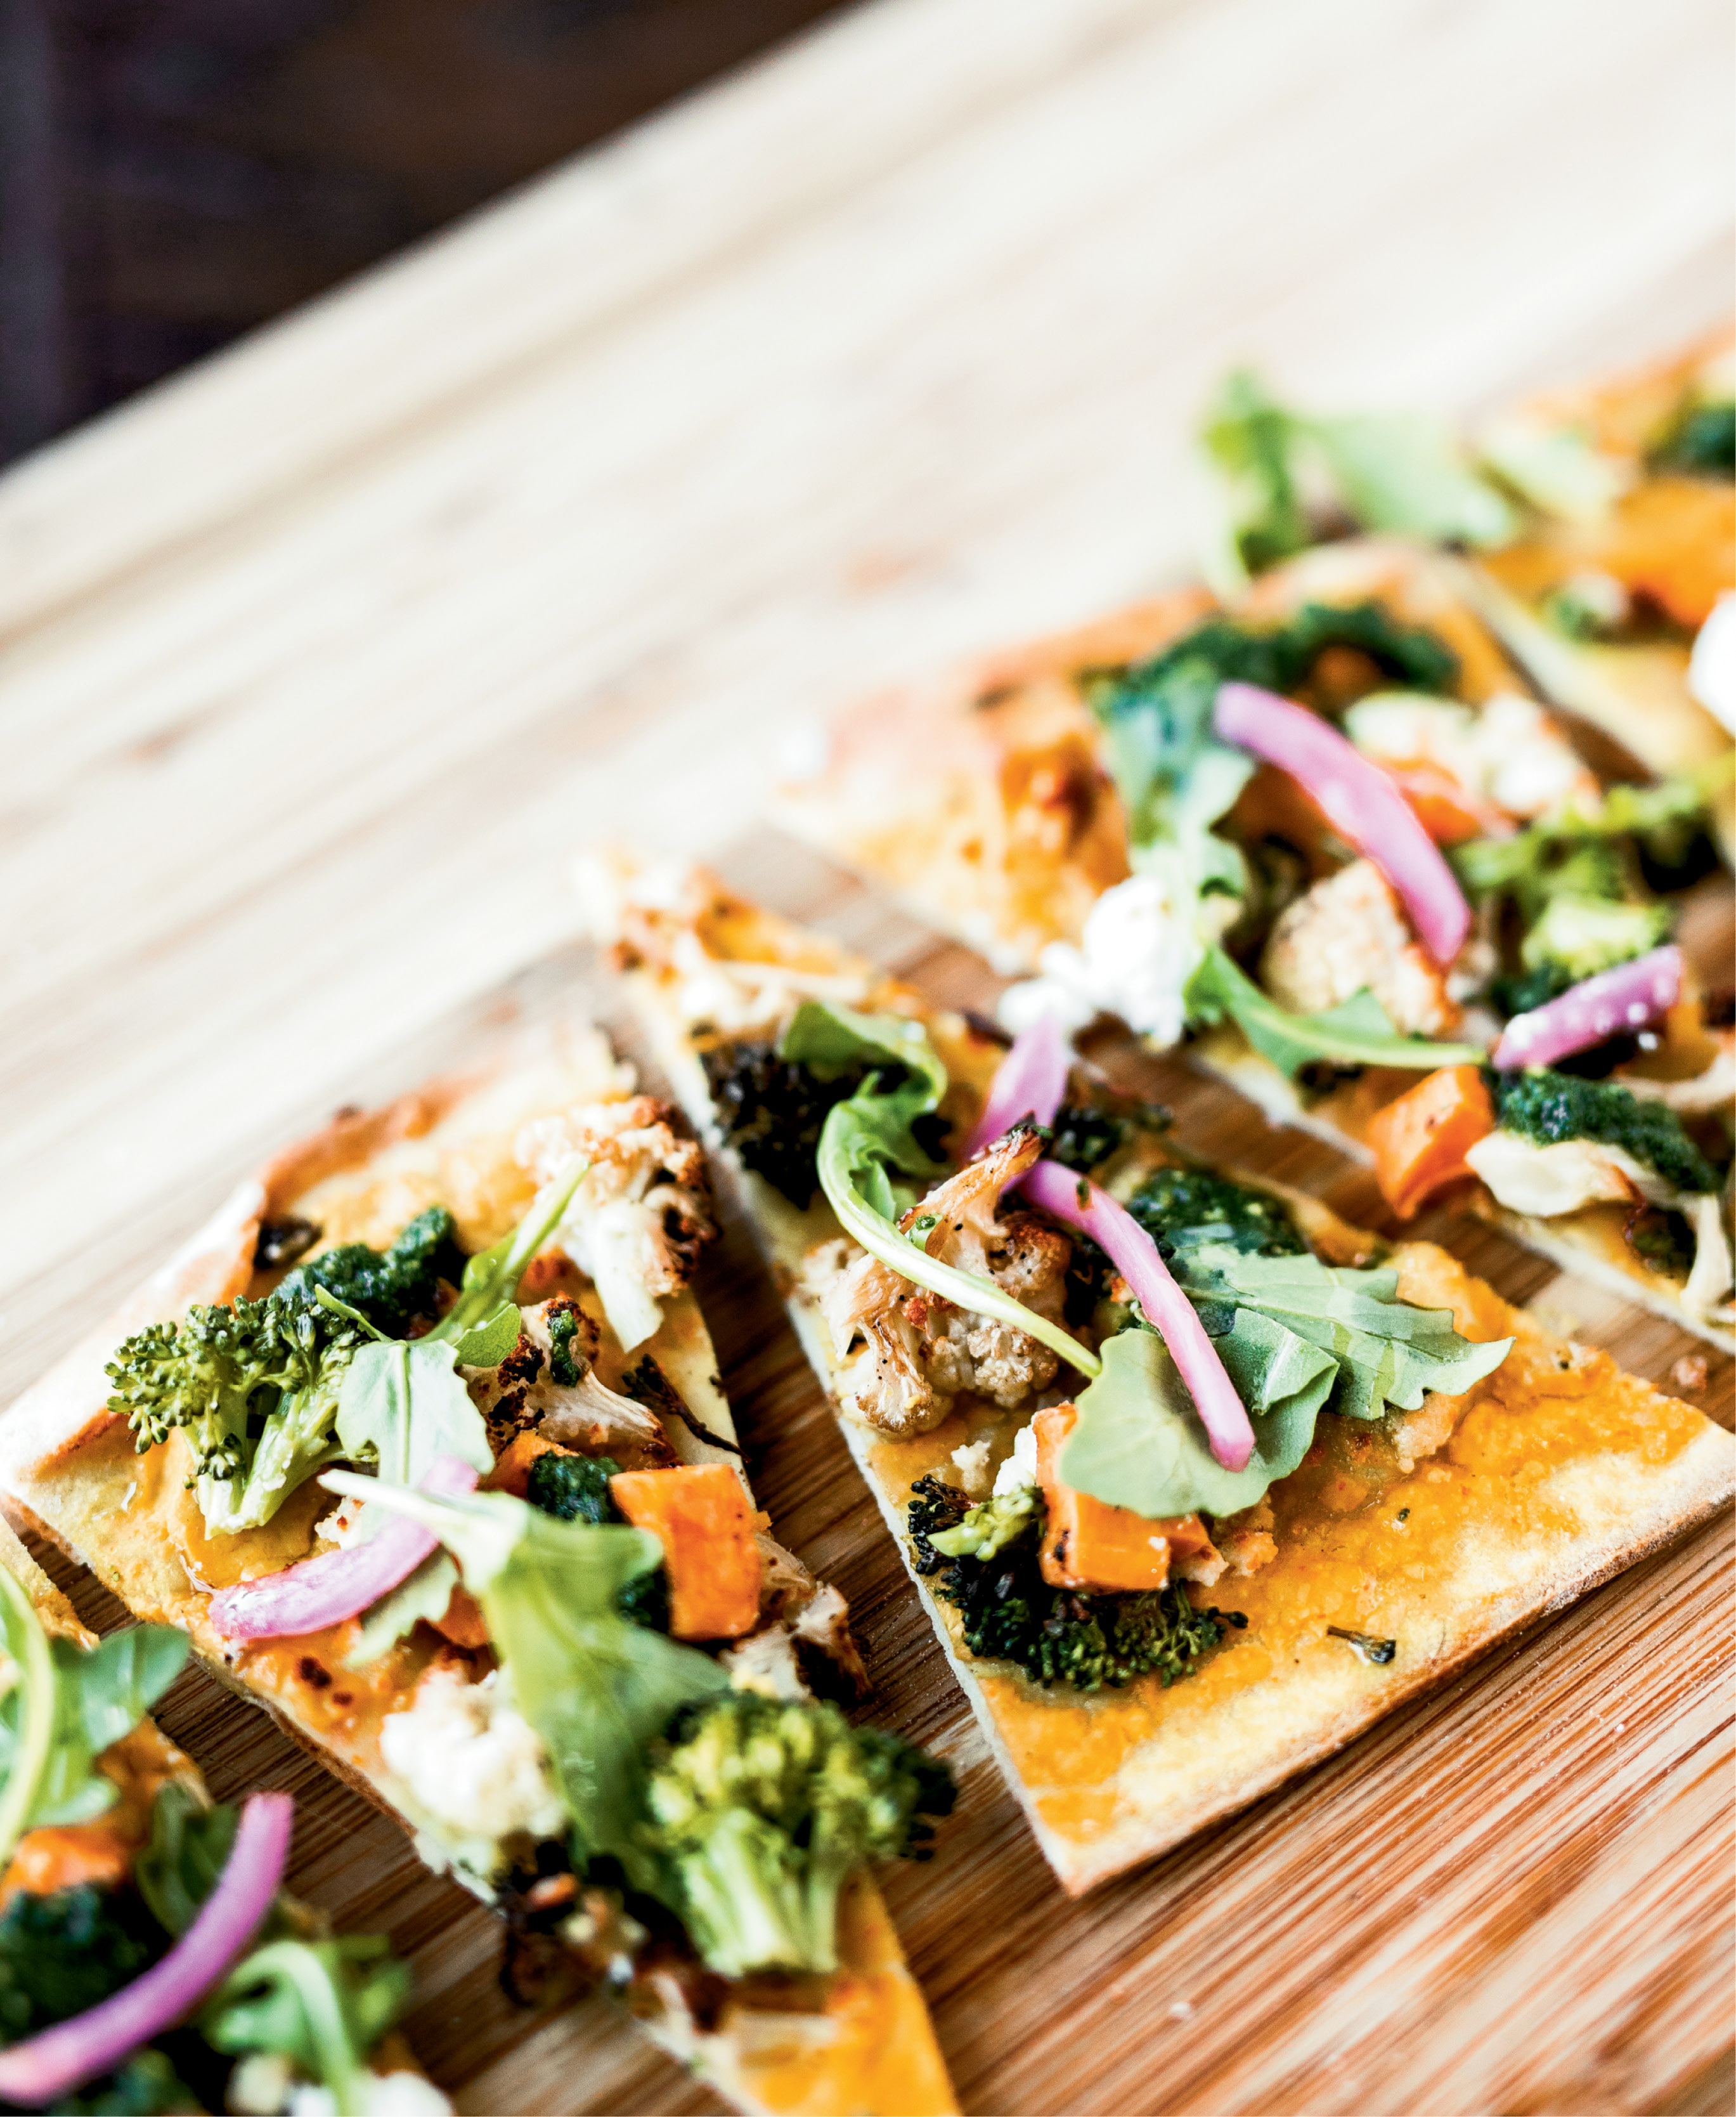 Fresh-picked produce was the norm when executive chef Brannon Florie visited his grandfather’s Mount Pleasant farm growing up. Now, he uses local sweet potatoes, broccoli, cauliflower, and other vegetables to add flavor to flatbread at The Granary.